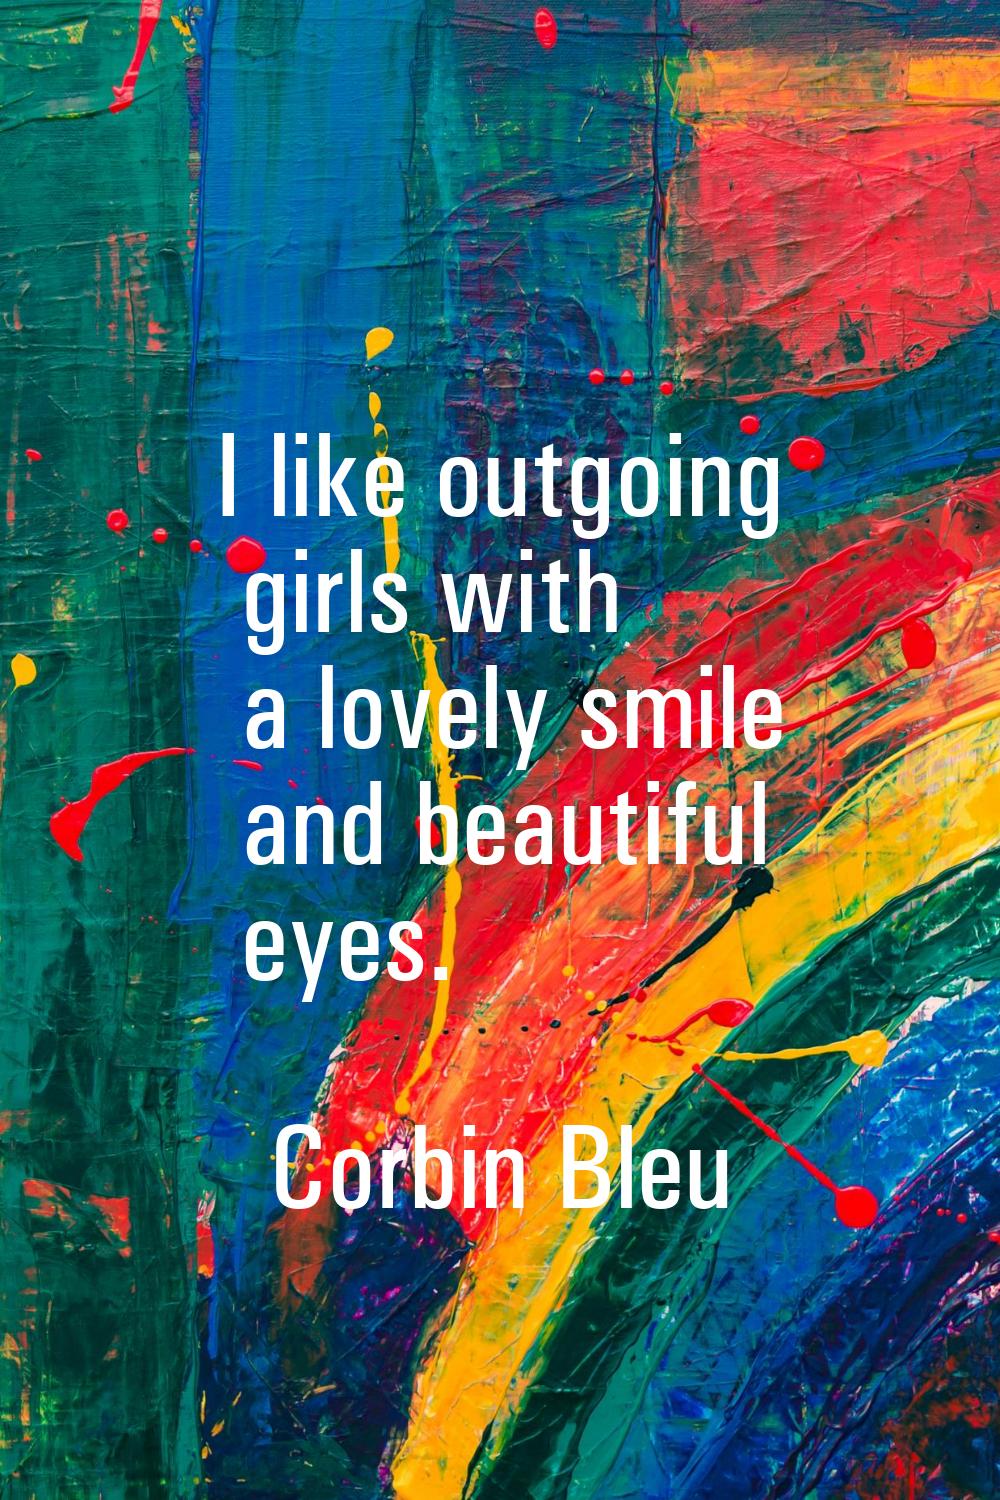 I like outgoing girls with a lovely smile and beautiful eyes.